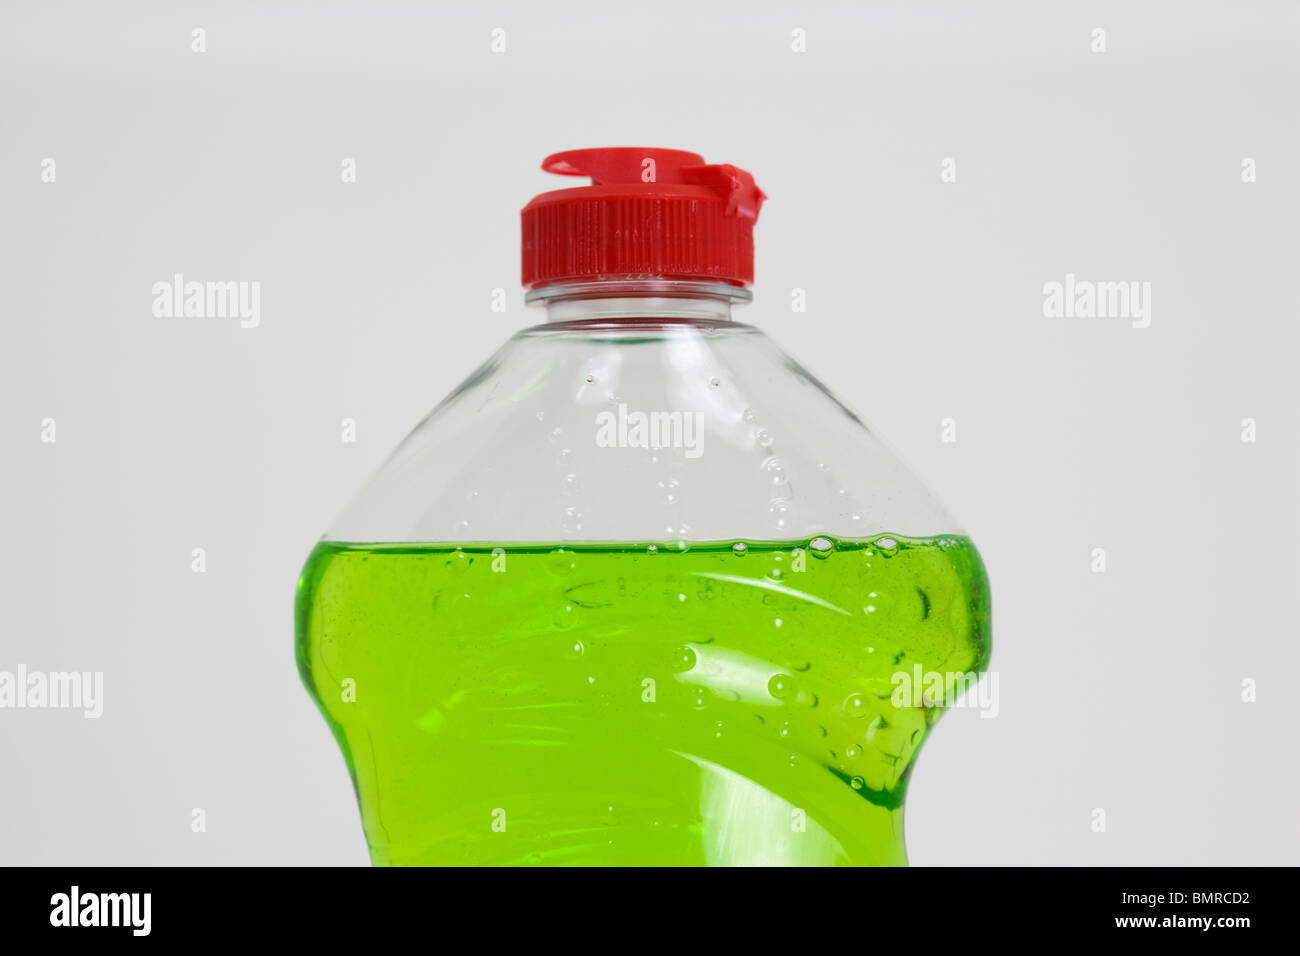 Download Washing Up Liquid Bottle High Resolution Stock Photography And Images Alamy Yellowimages Mockups